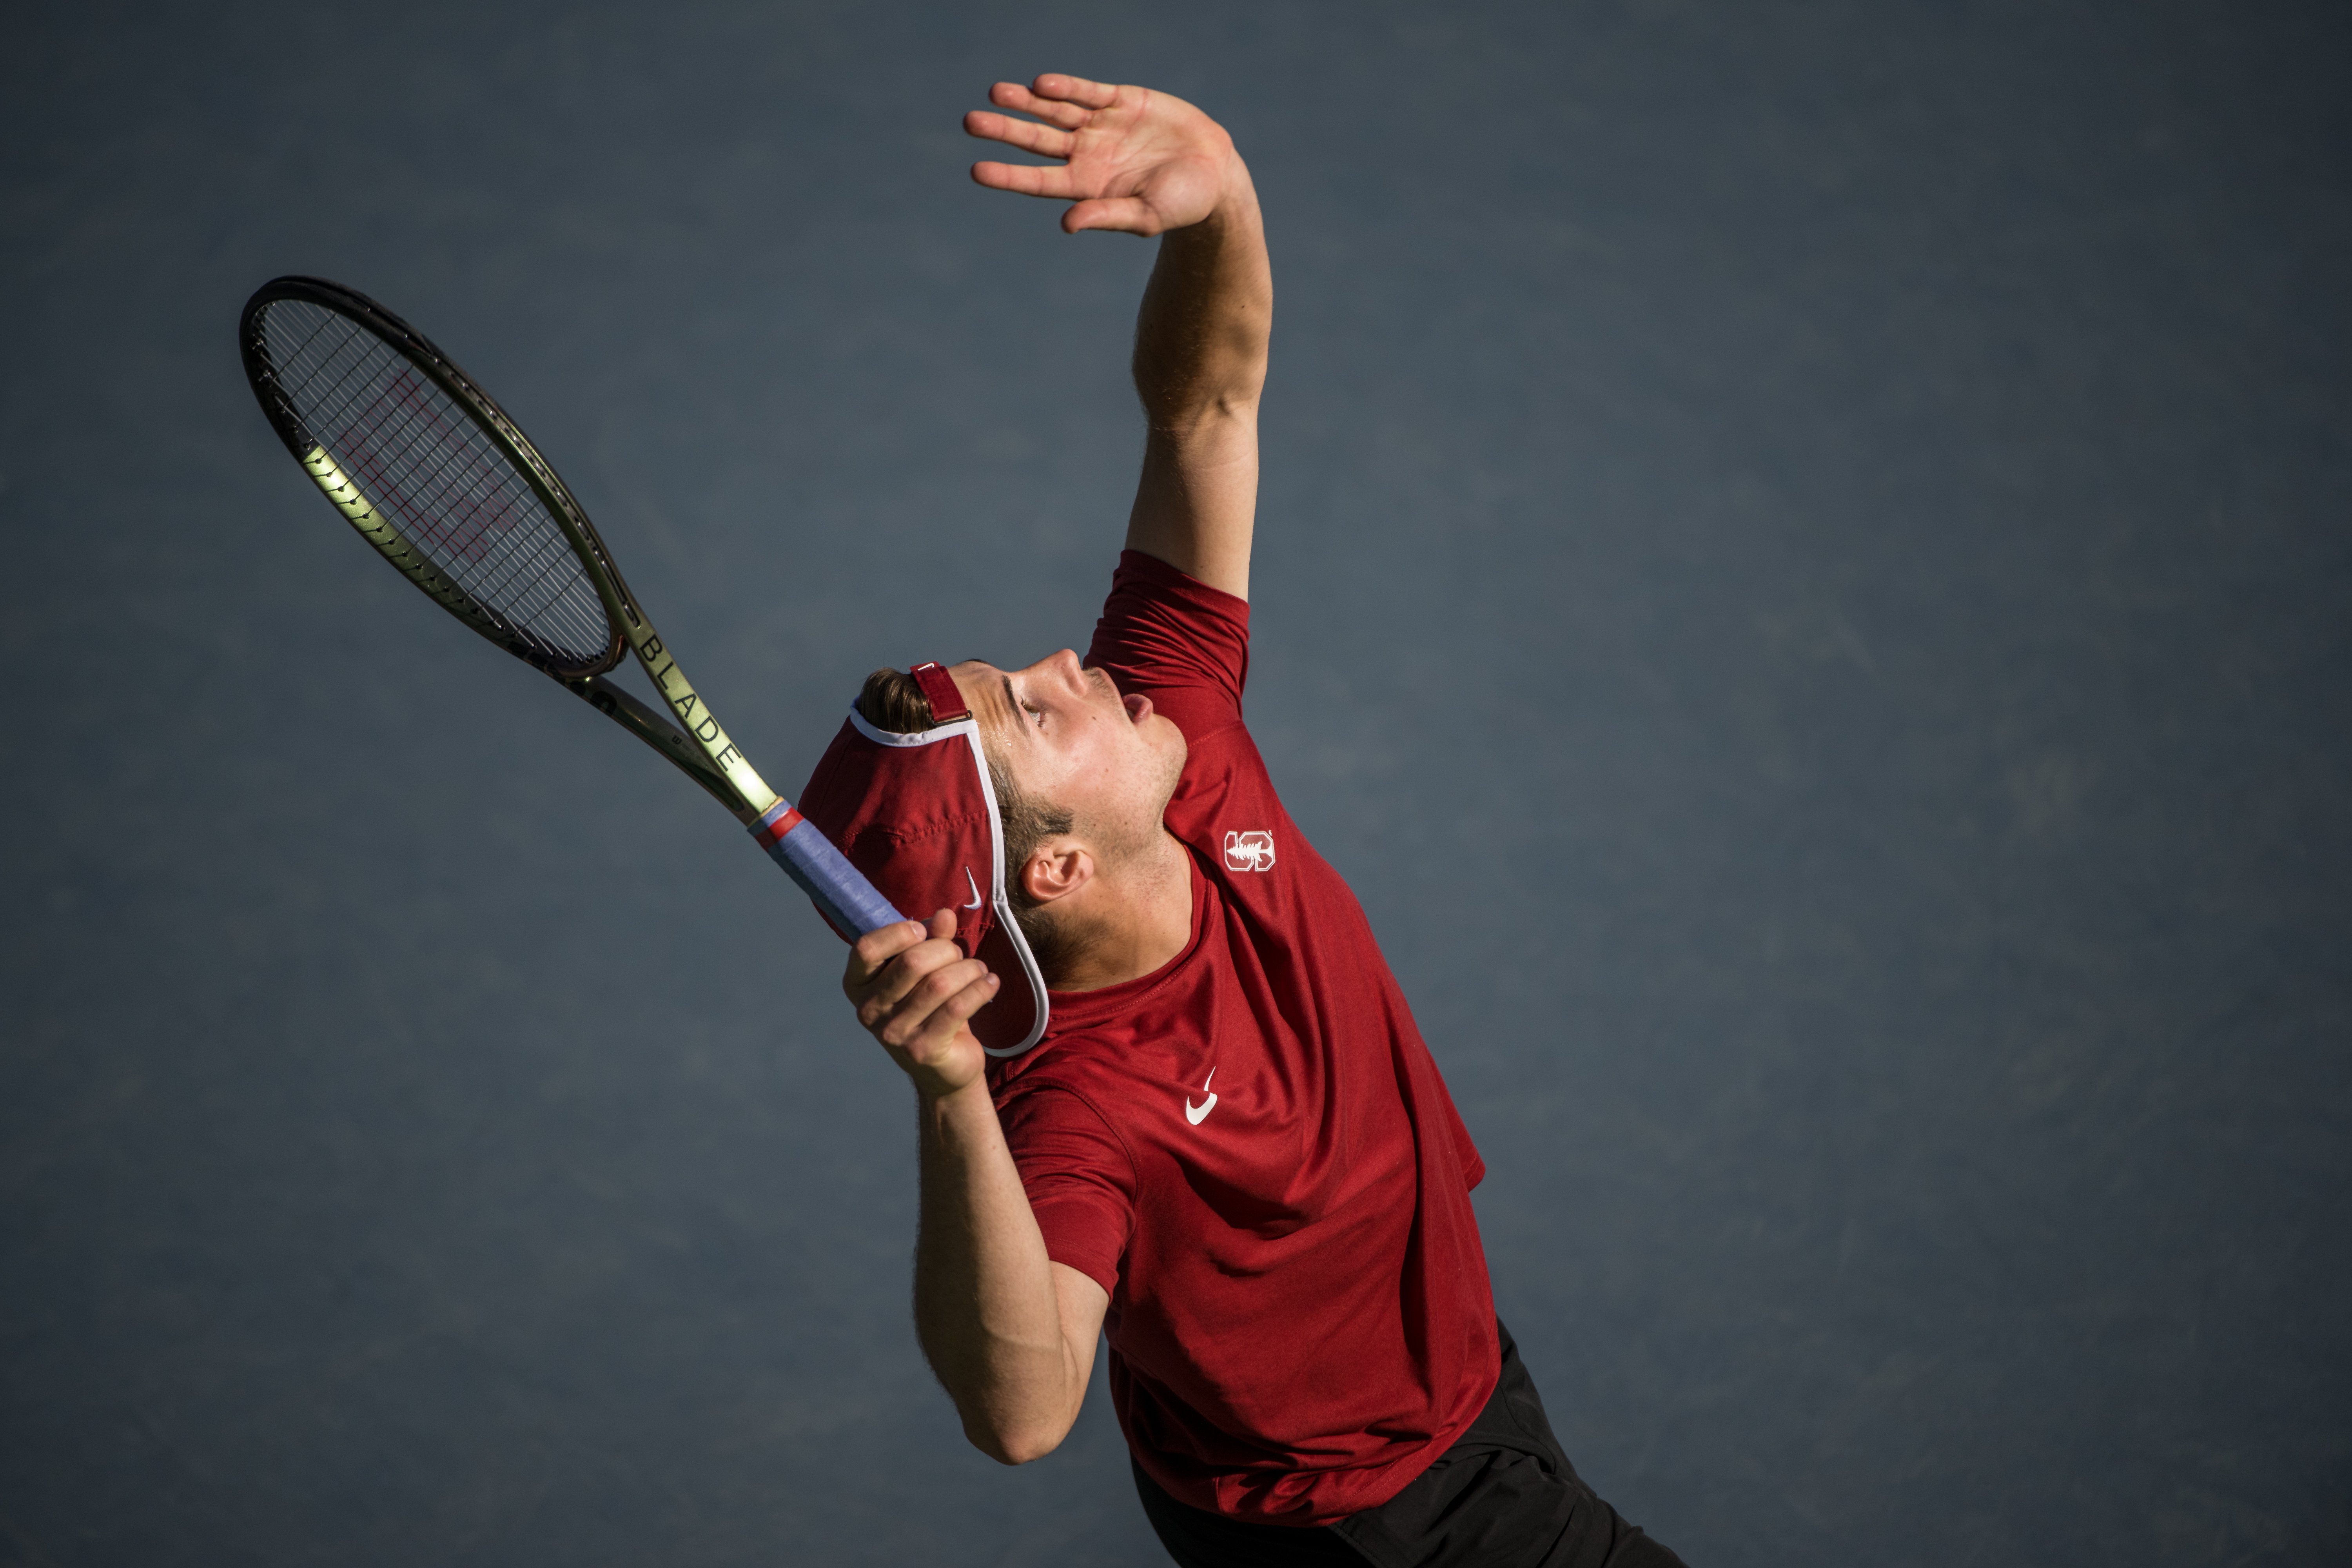 For international players, college tennis is a passport to the pros